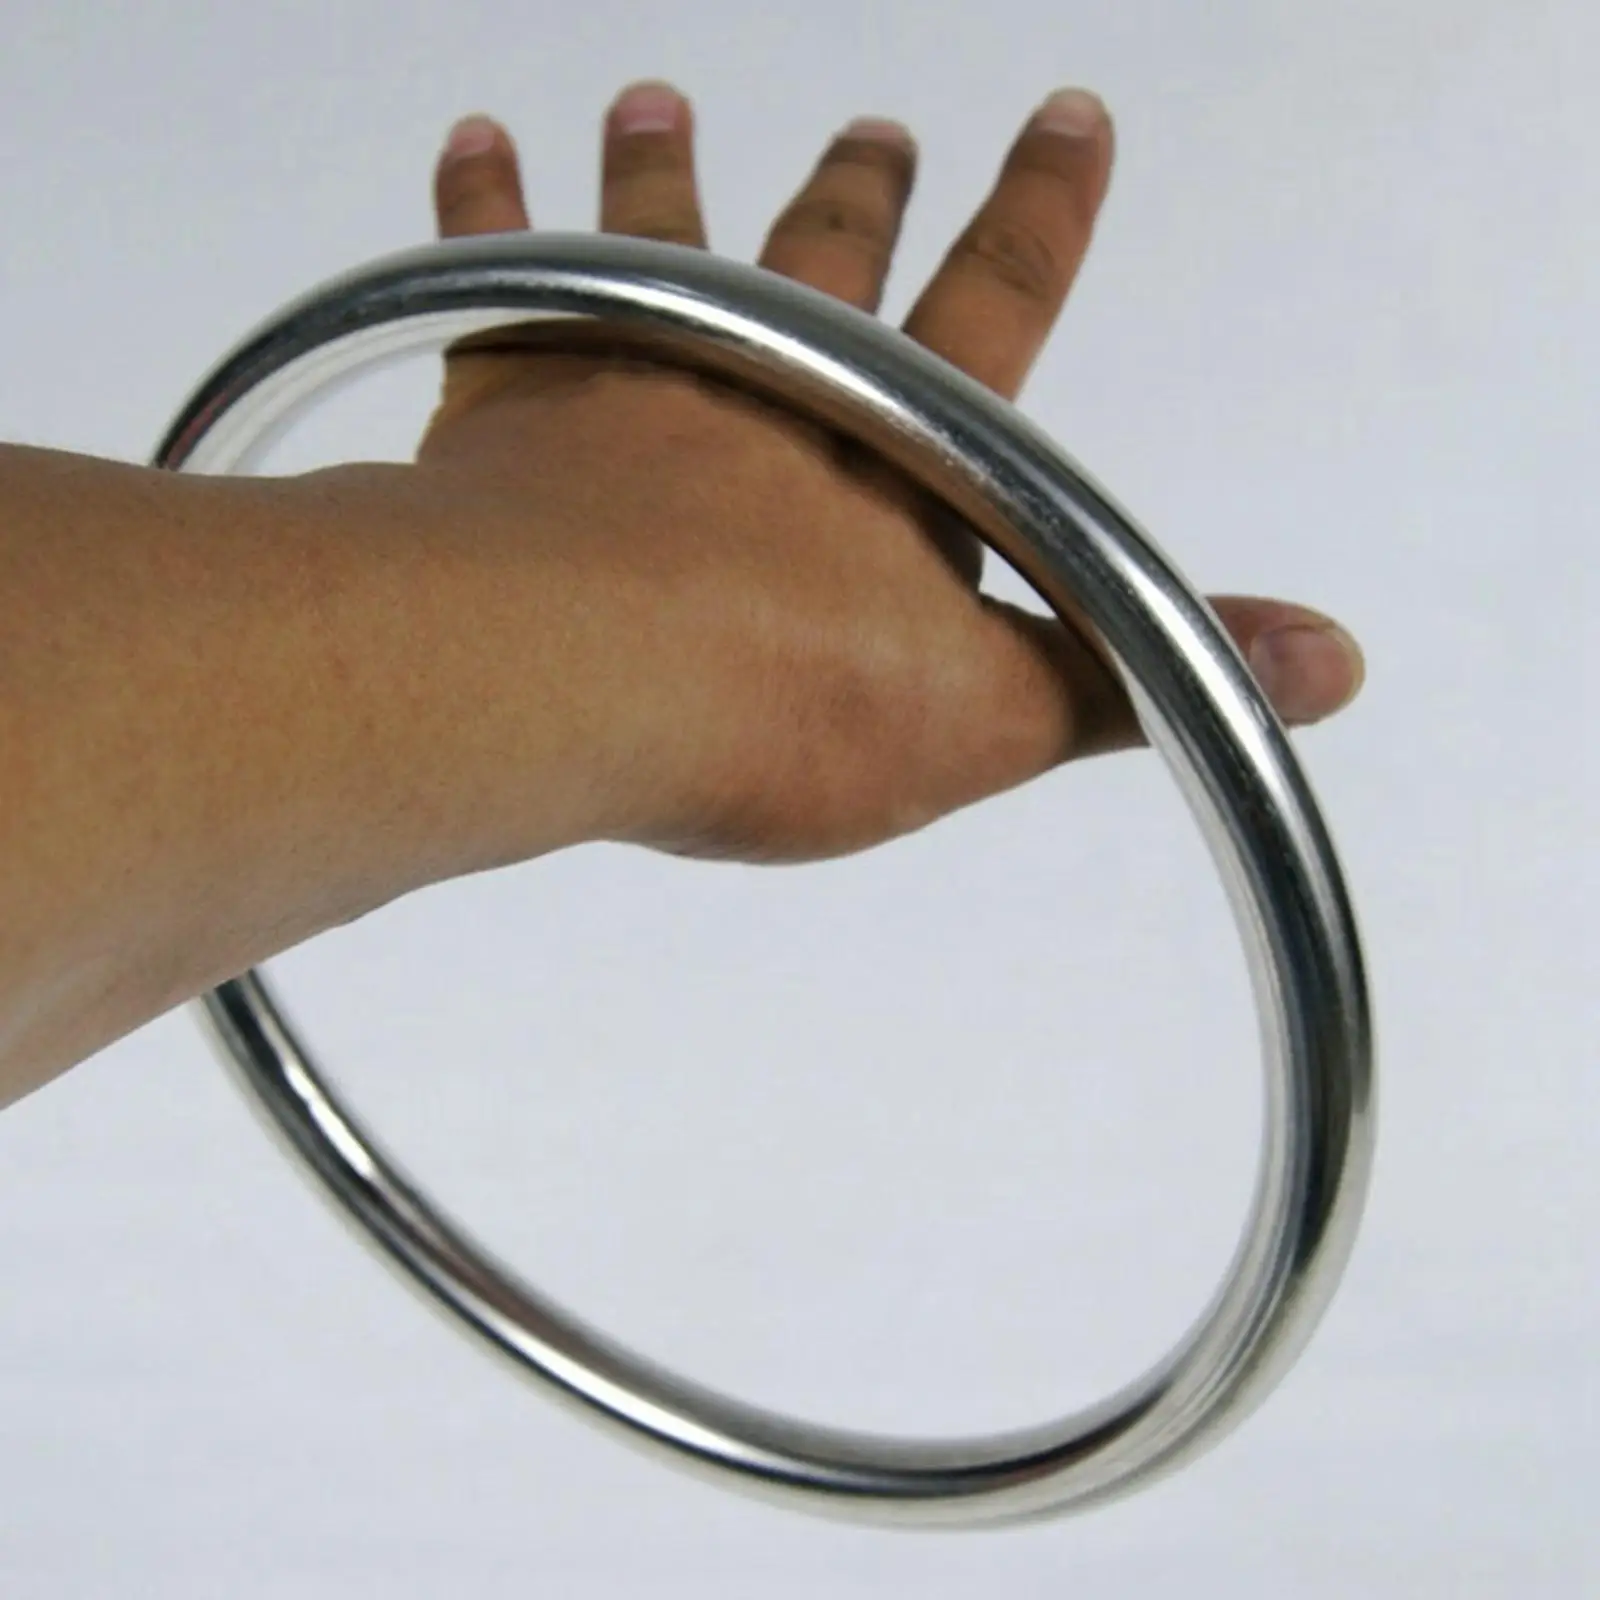 Stainless Steel Rattan Ring Durable Training Equipment Rings Sturdy Hoop Training Ring for Boxing Martial Arts